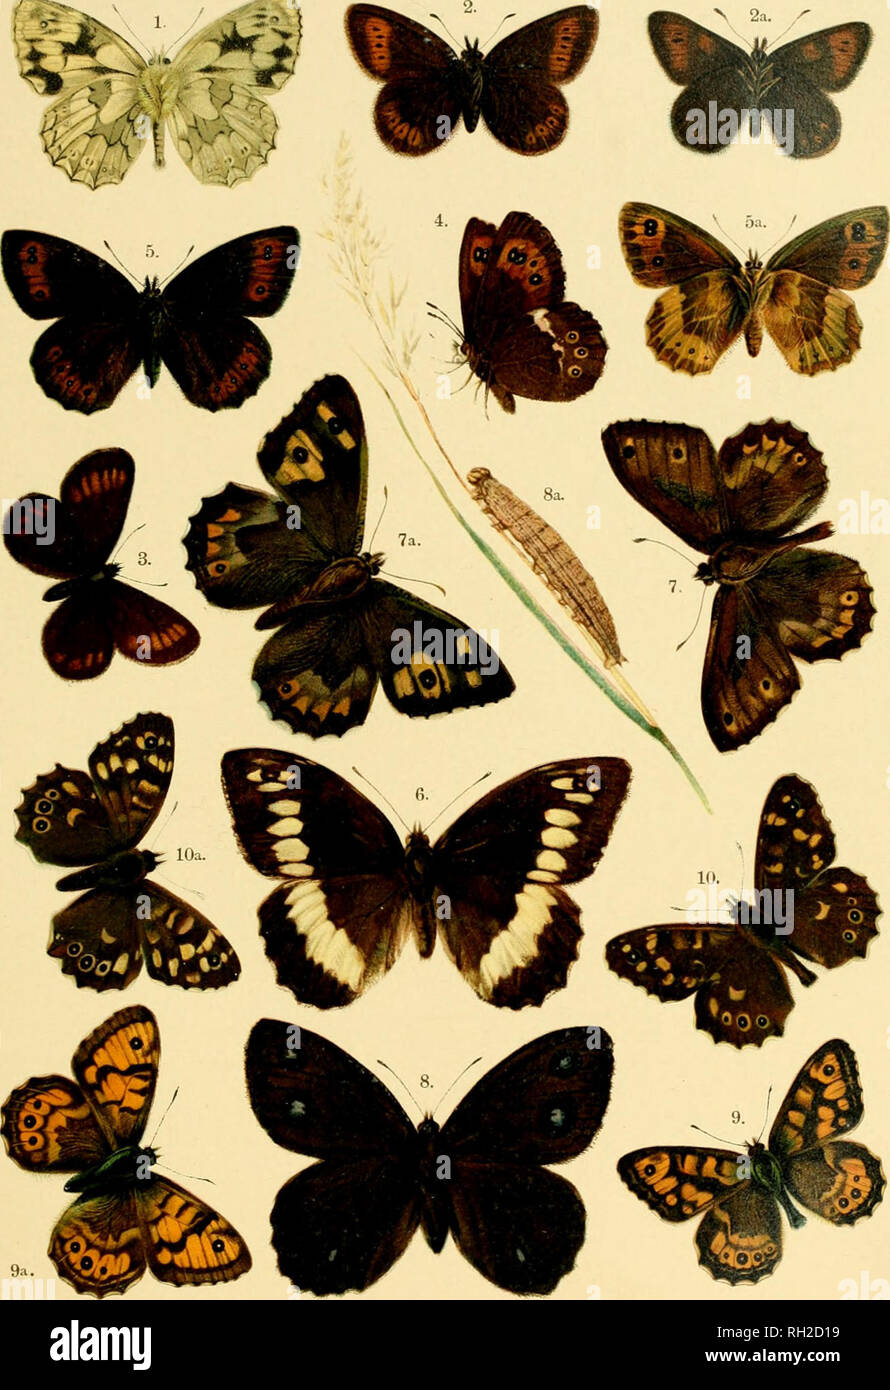 . British and European butterflies and moths (Macrolepidoptera). Lepidoptera -- Great Britain; Lepidoptera -- Europe. PLATE XL. 1. Melanargia galathea (under side of Male). 2. Erebia epiphron, 2a. Under side. 3. Erebia pharte. 4. Erebia ligea (under side). 5. Erebia aethiops, 5 a. Female, under side. 6. Satyrus circe. 7. Satyrus semele, 7a. Female. 8. Satyrus dryas, 8a. Larva. 9. Pararge mega;ra, 9a. Female. 10. Pararge aegeria, var. asgerides, loa. Female. British and European Butterflies and Moths.. Please note that these images are extracted from scanned page images that may have been digit Stock Photo